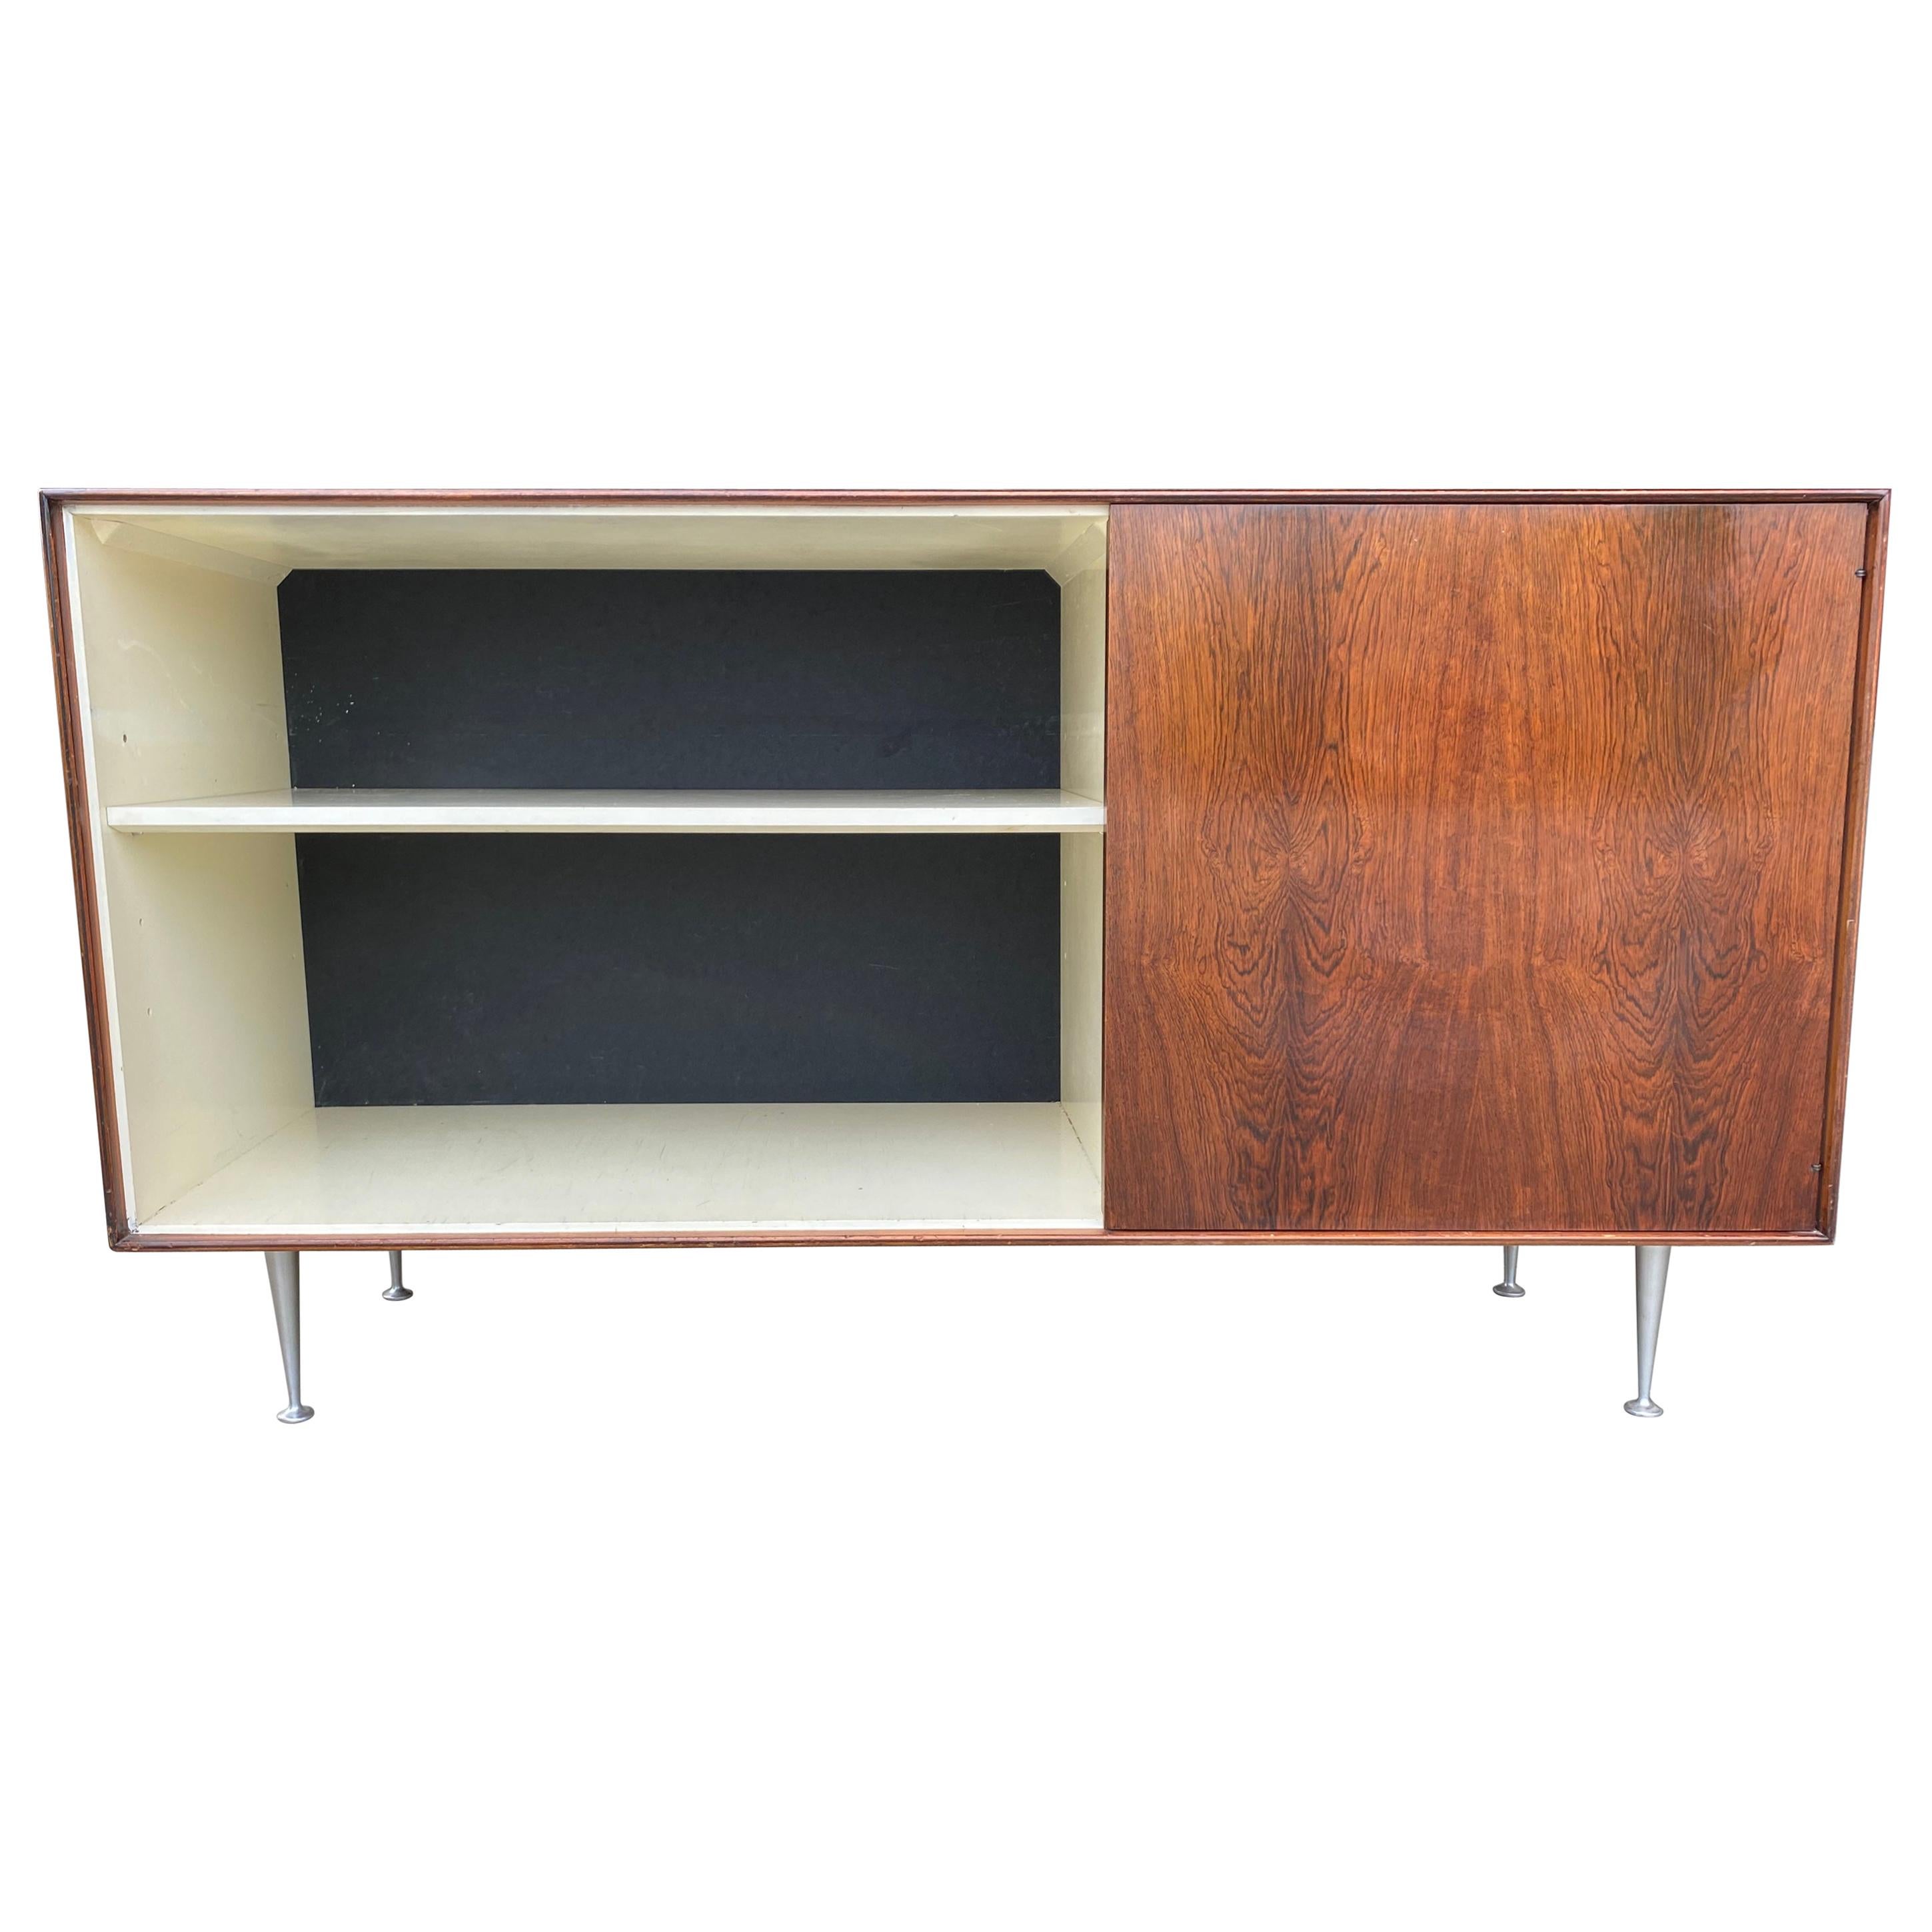 Classic George Nelson Rosewood Thin Edge Cabinet, Herman Miller